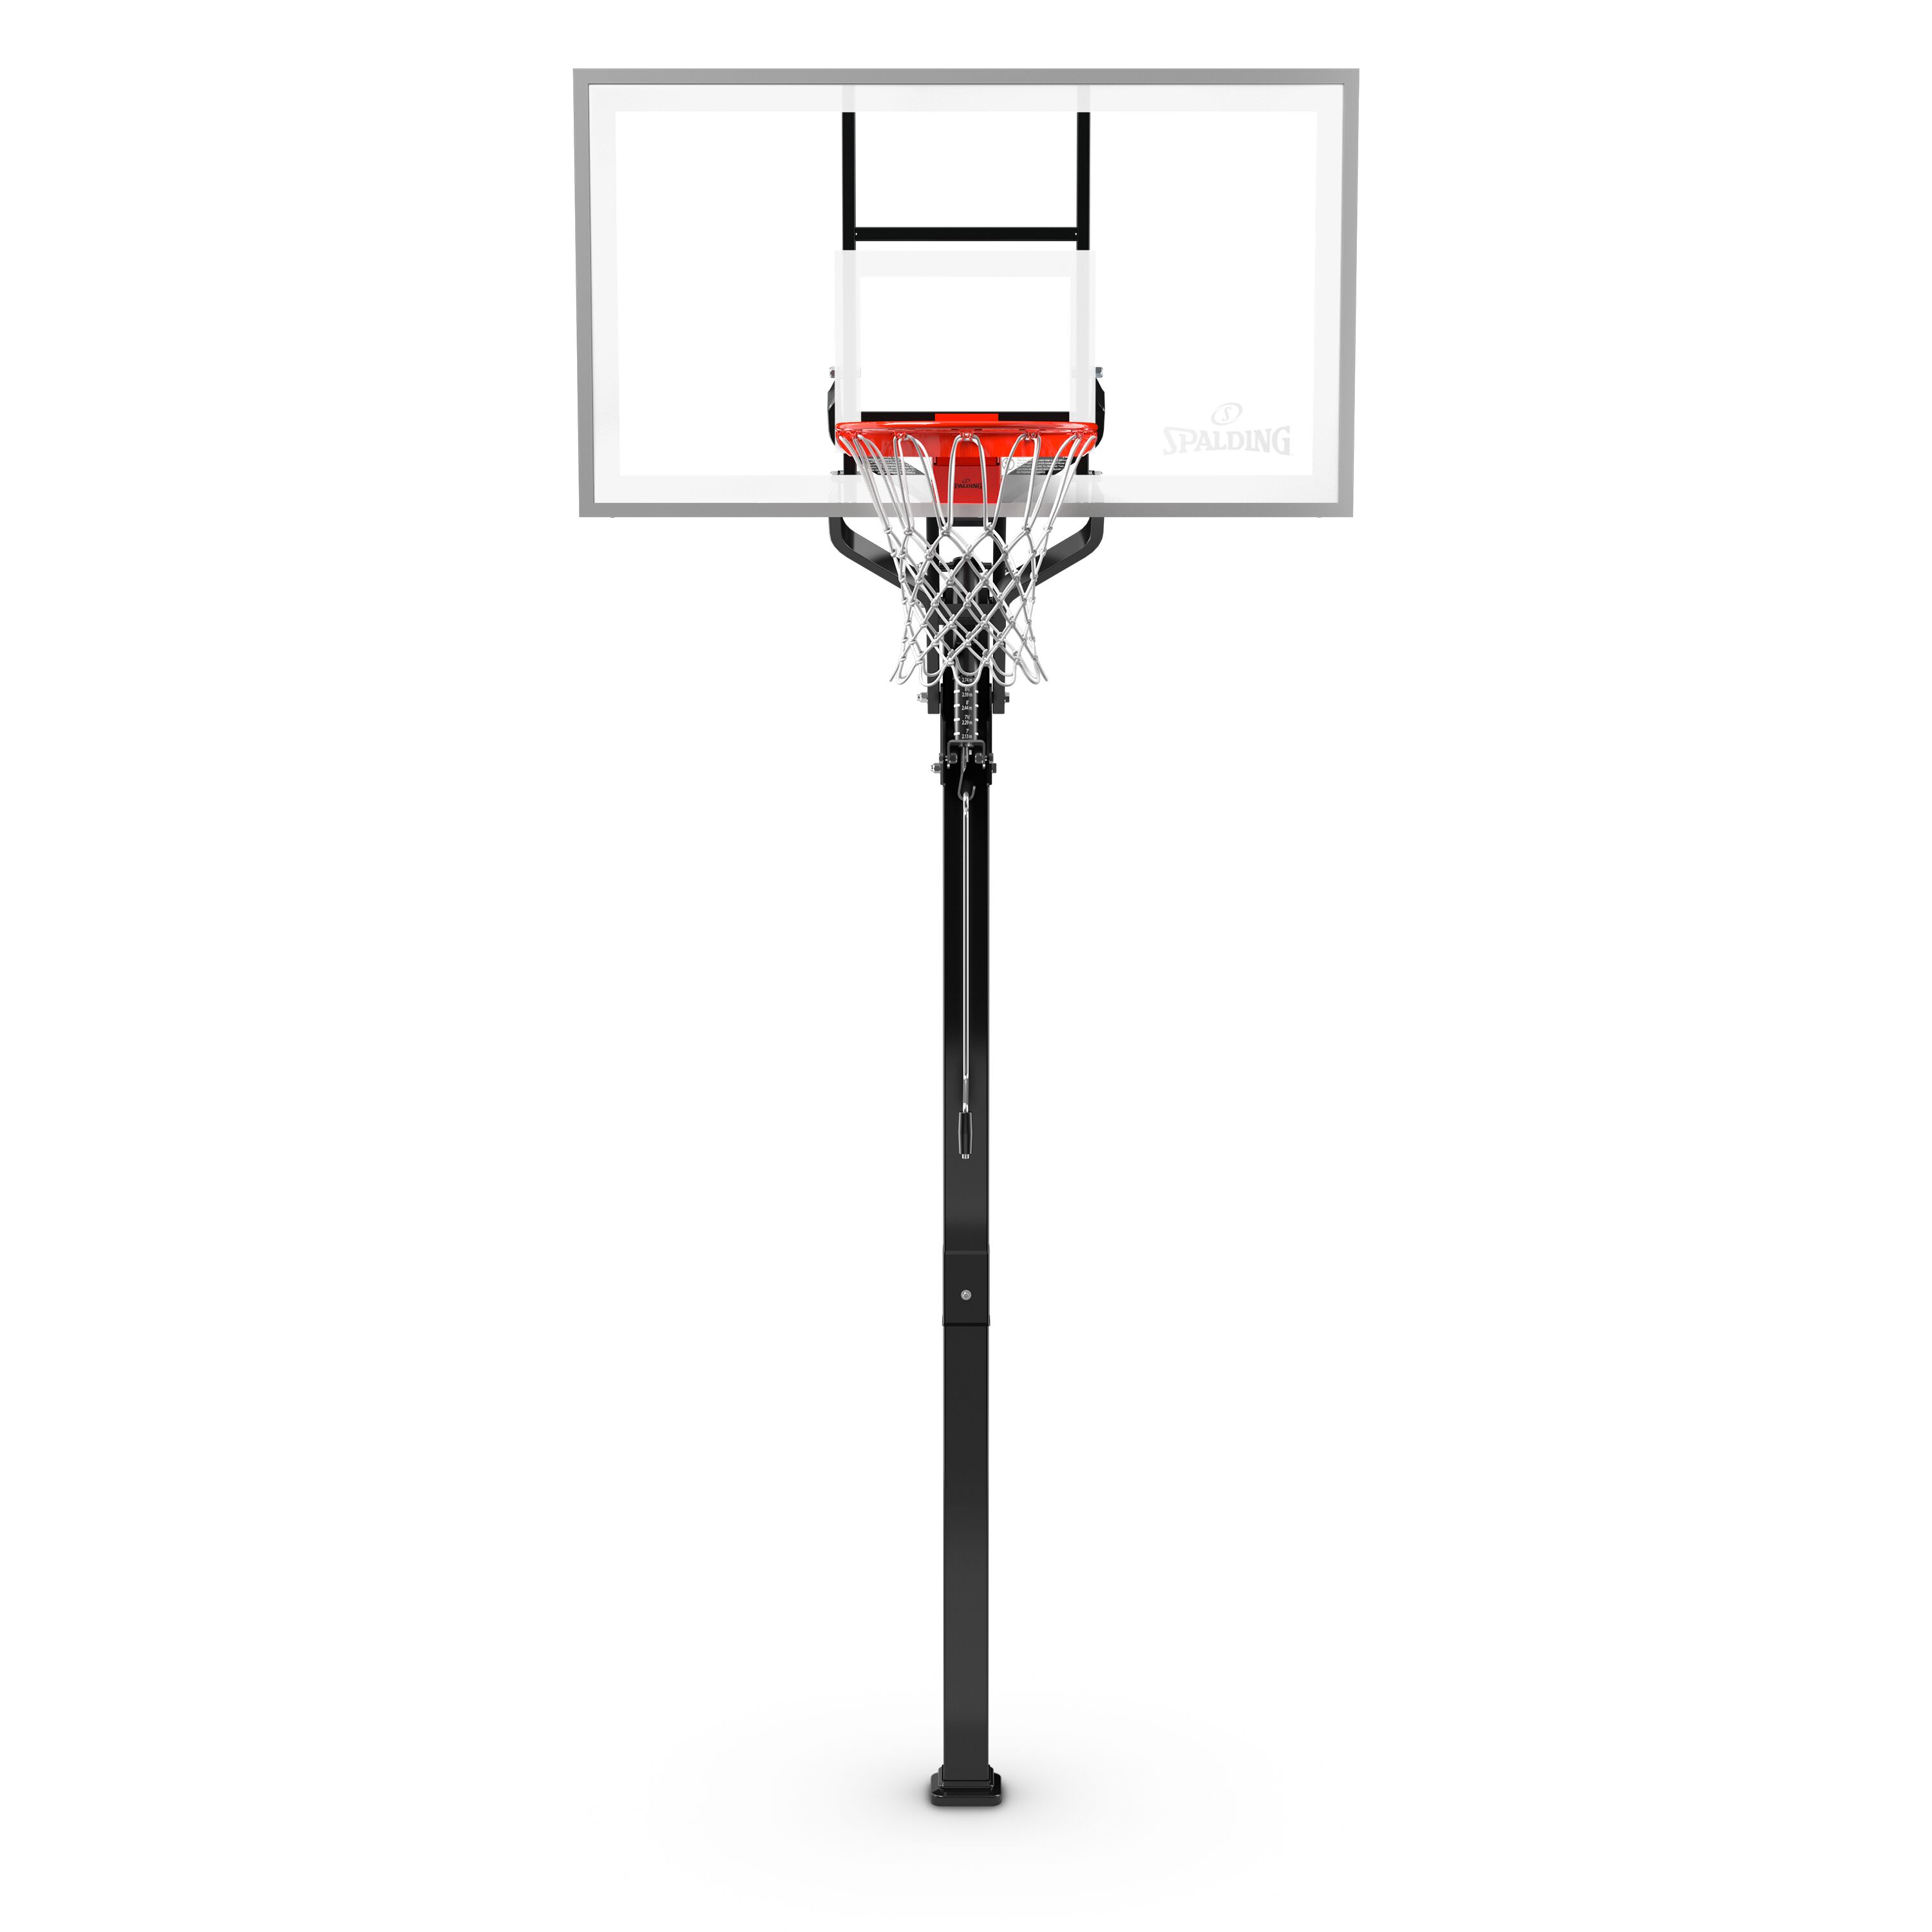 Spalding 60 In. Tempered Glass U-Turn® In Ground Basketball Systems Hoop - image 2 of 6